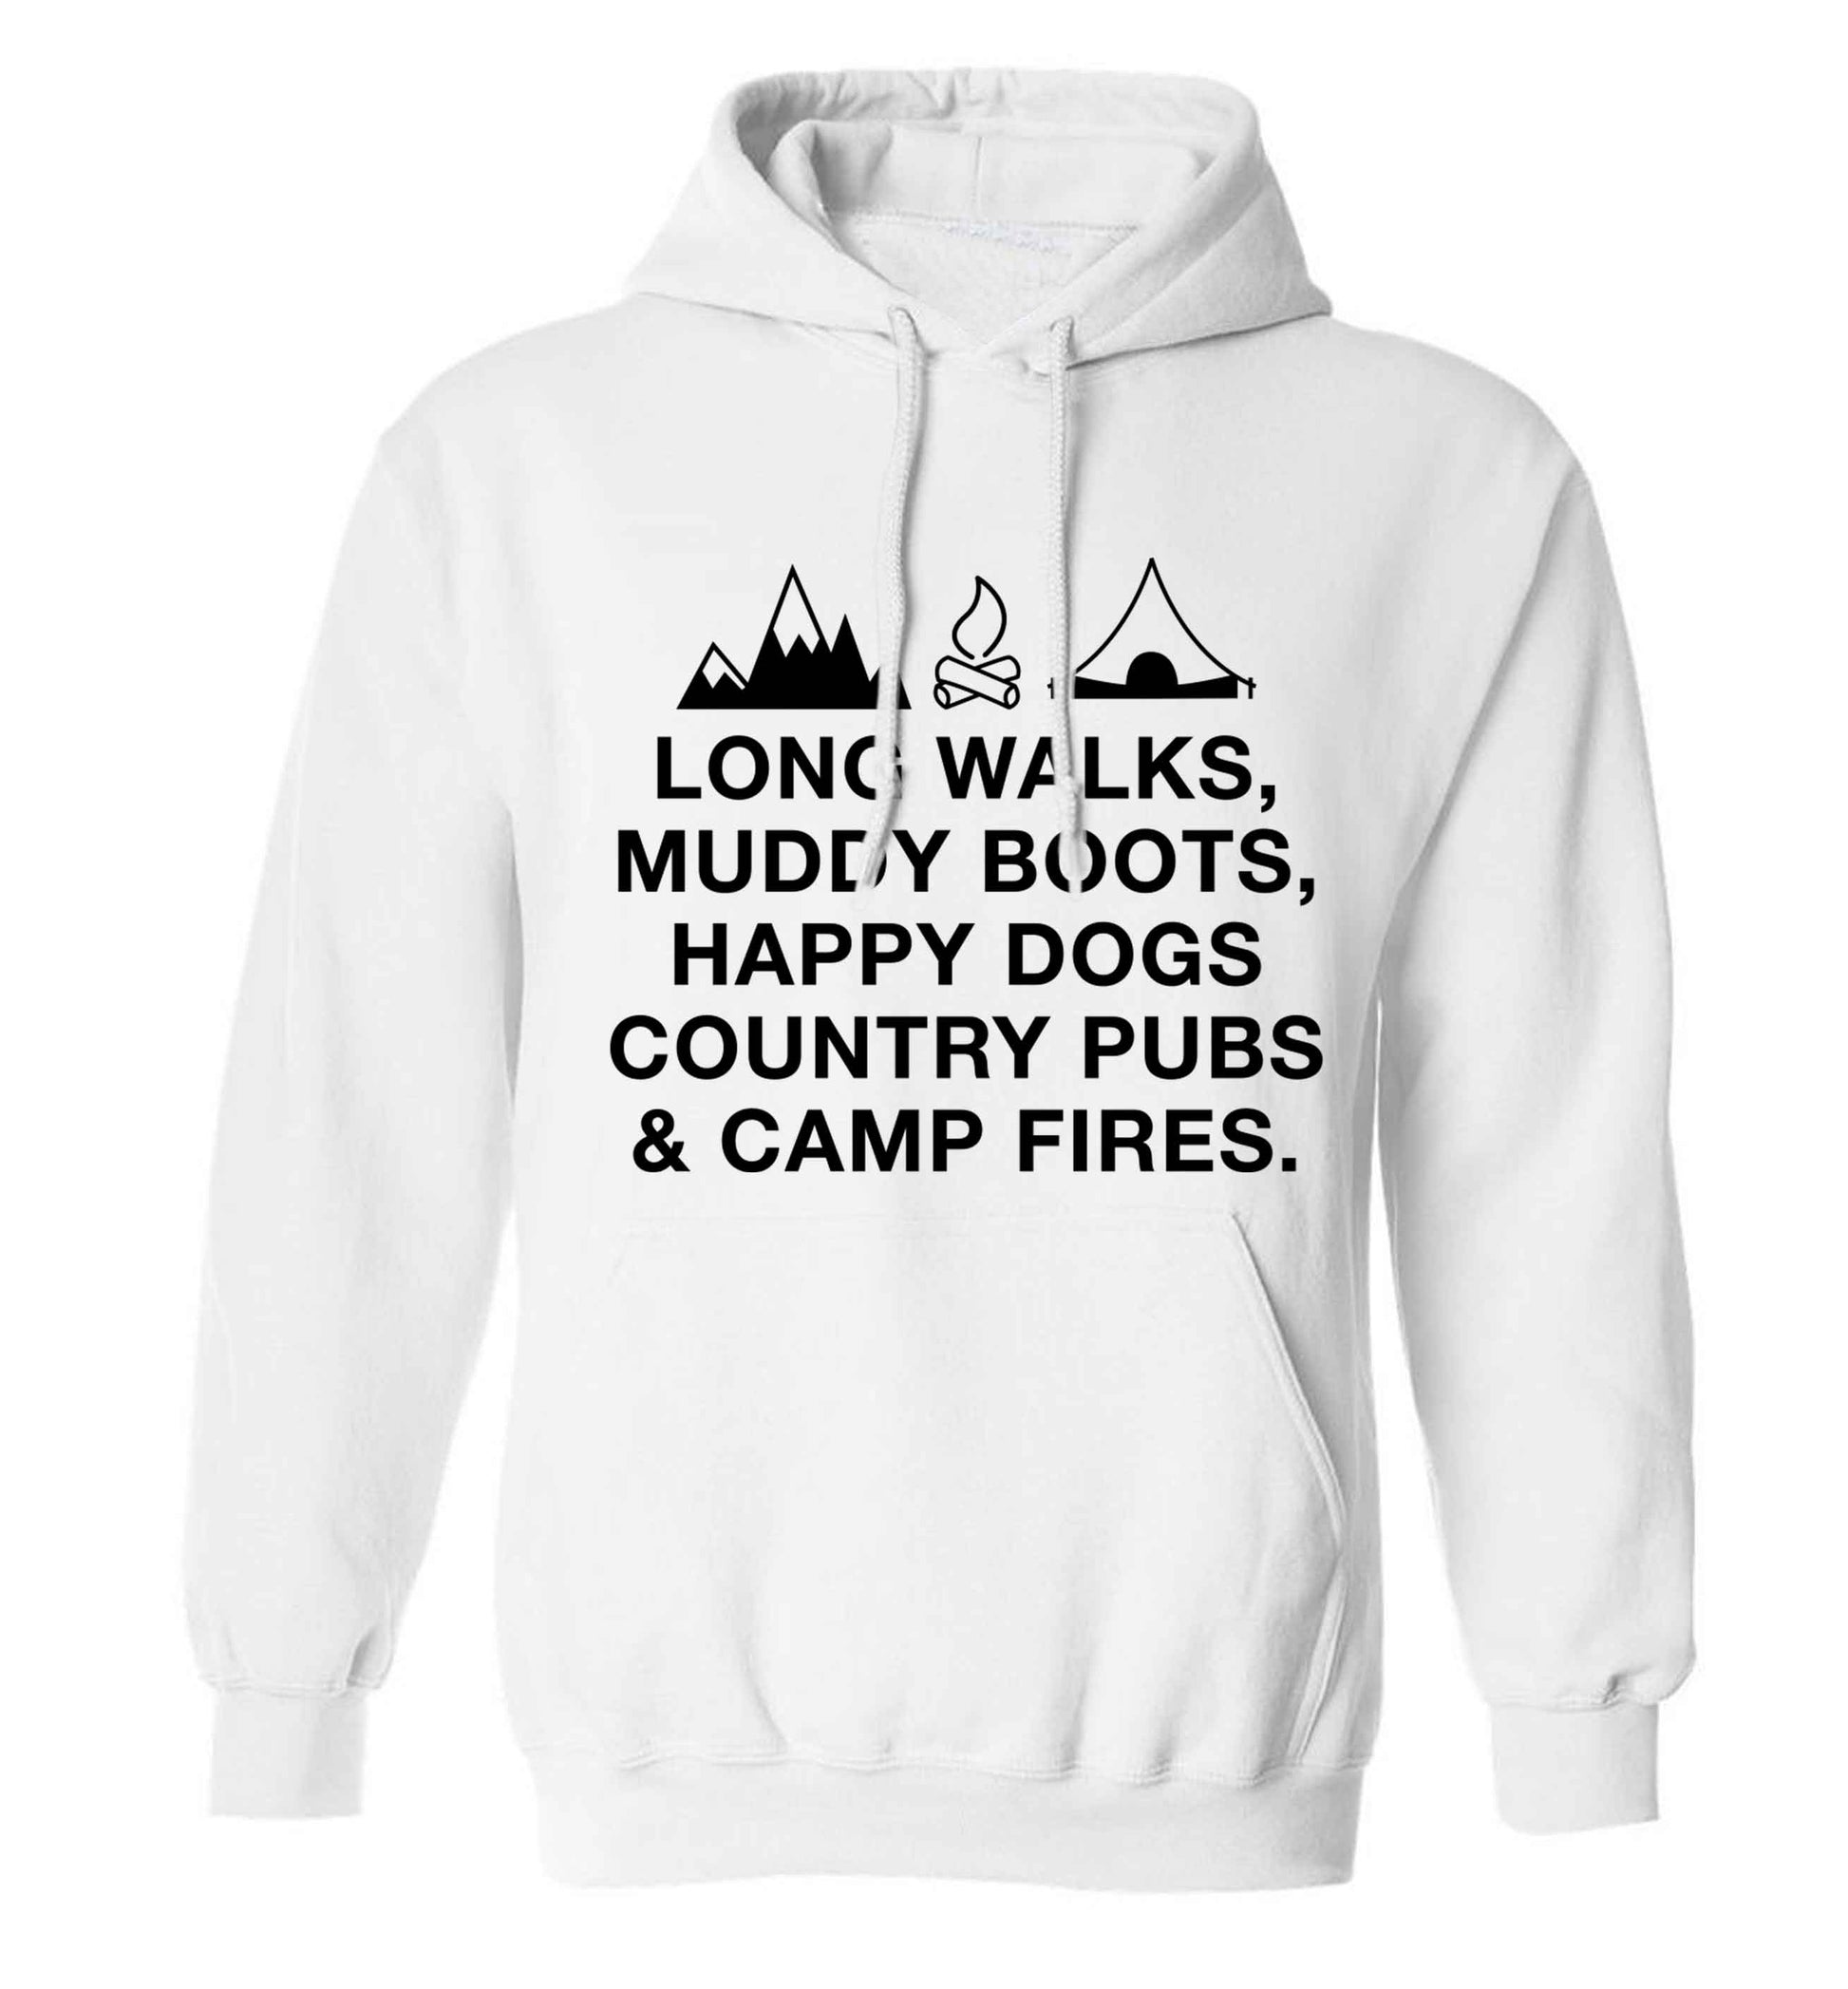 Long walks muddy boots happy dogs country pubs and camp fires adults unisex white hoodie 2XL